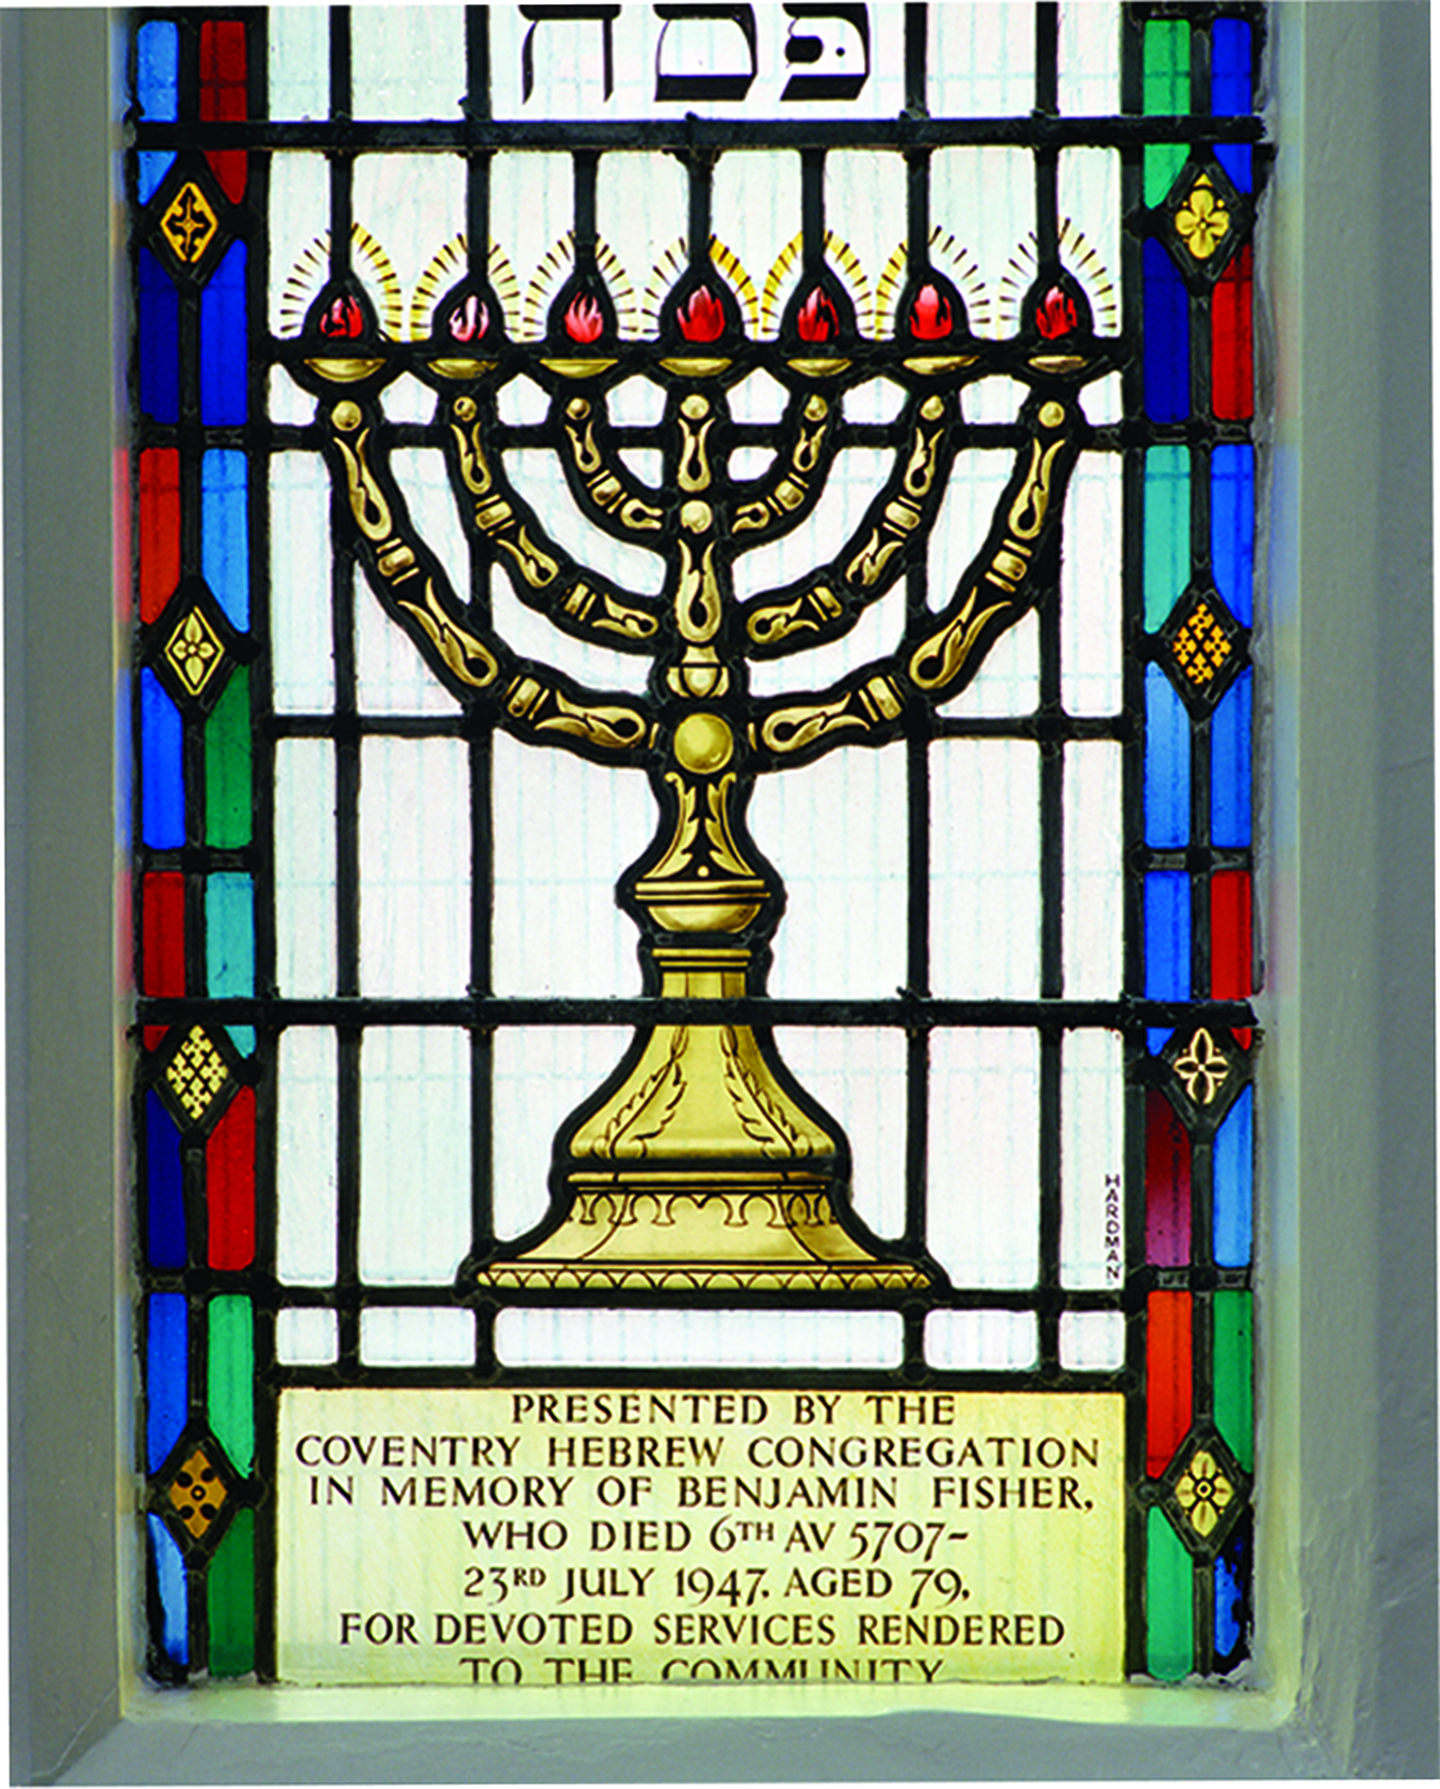 Menorah in modern stained glass by Hardman Studios of Birmingham, at Coventry Synagogue